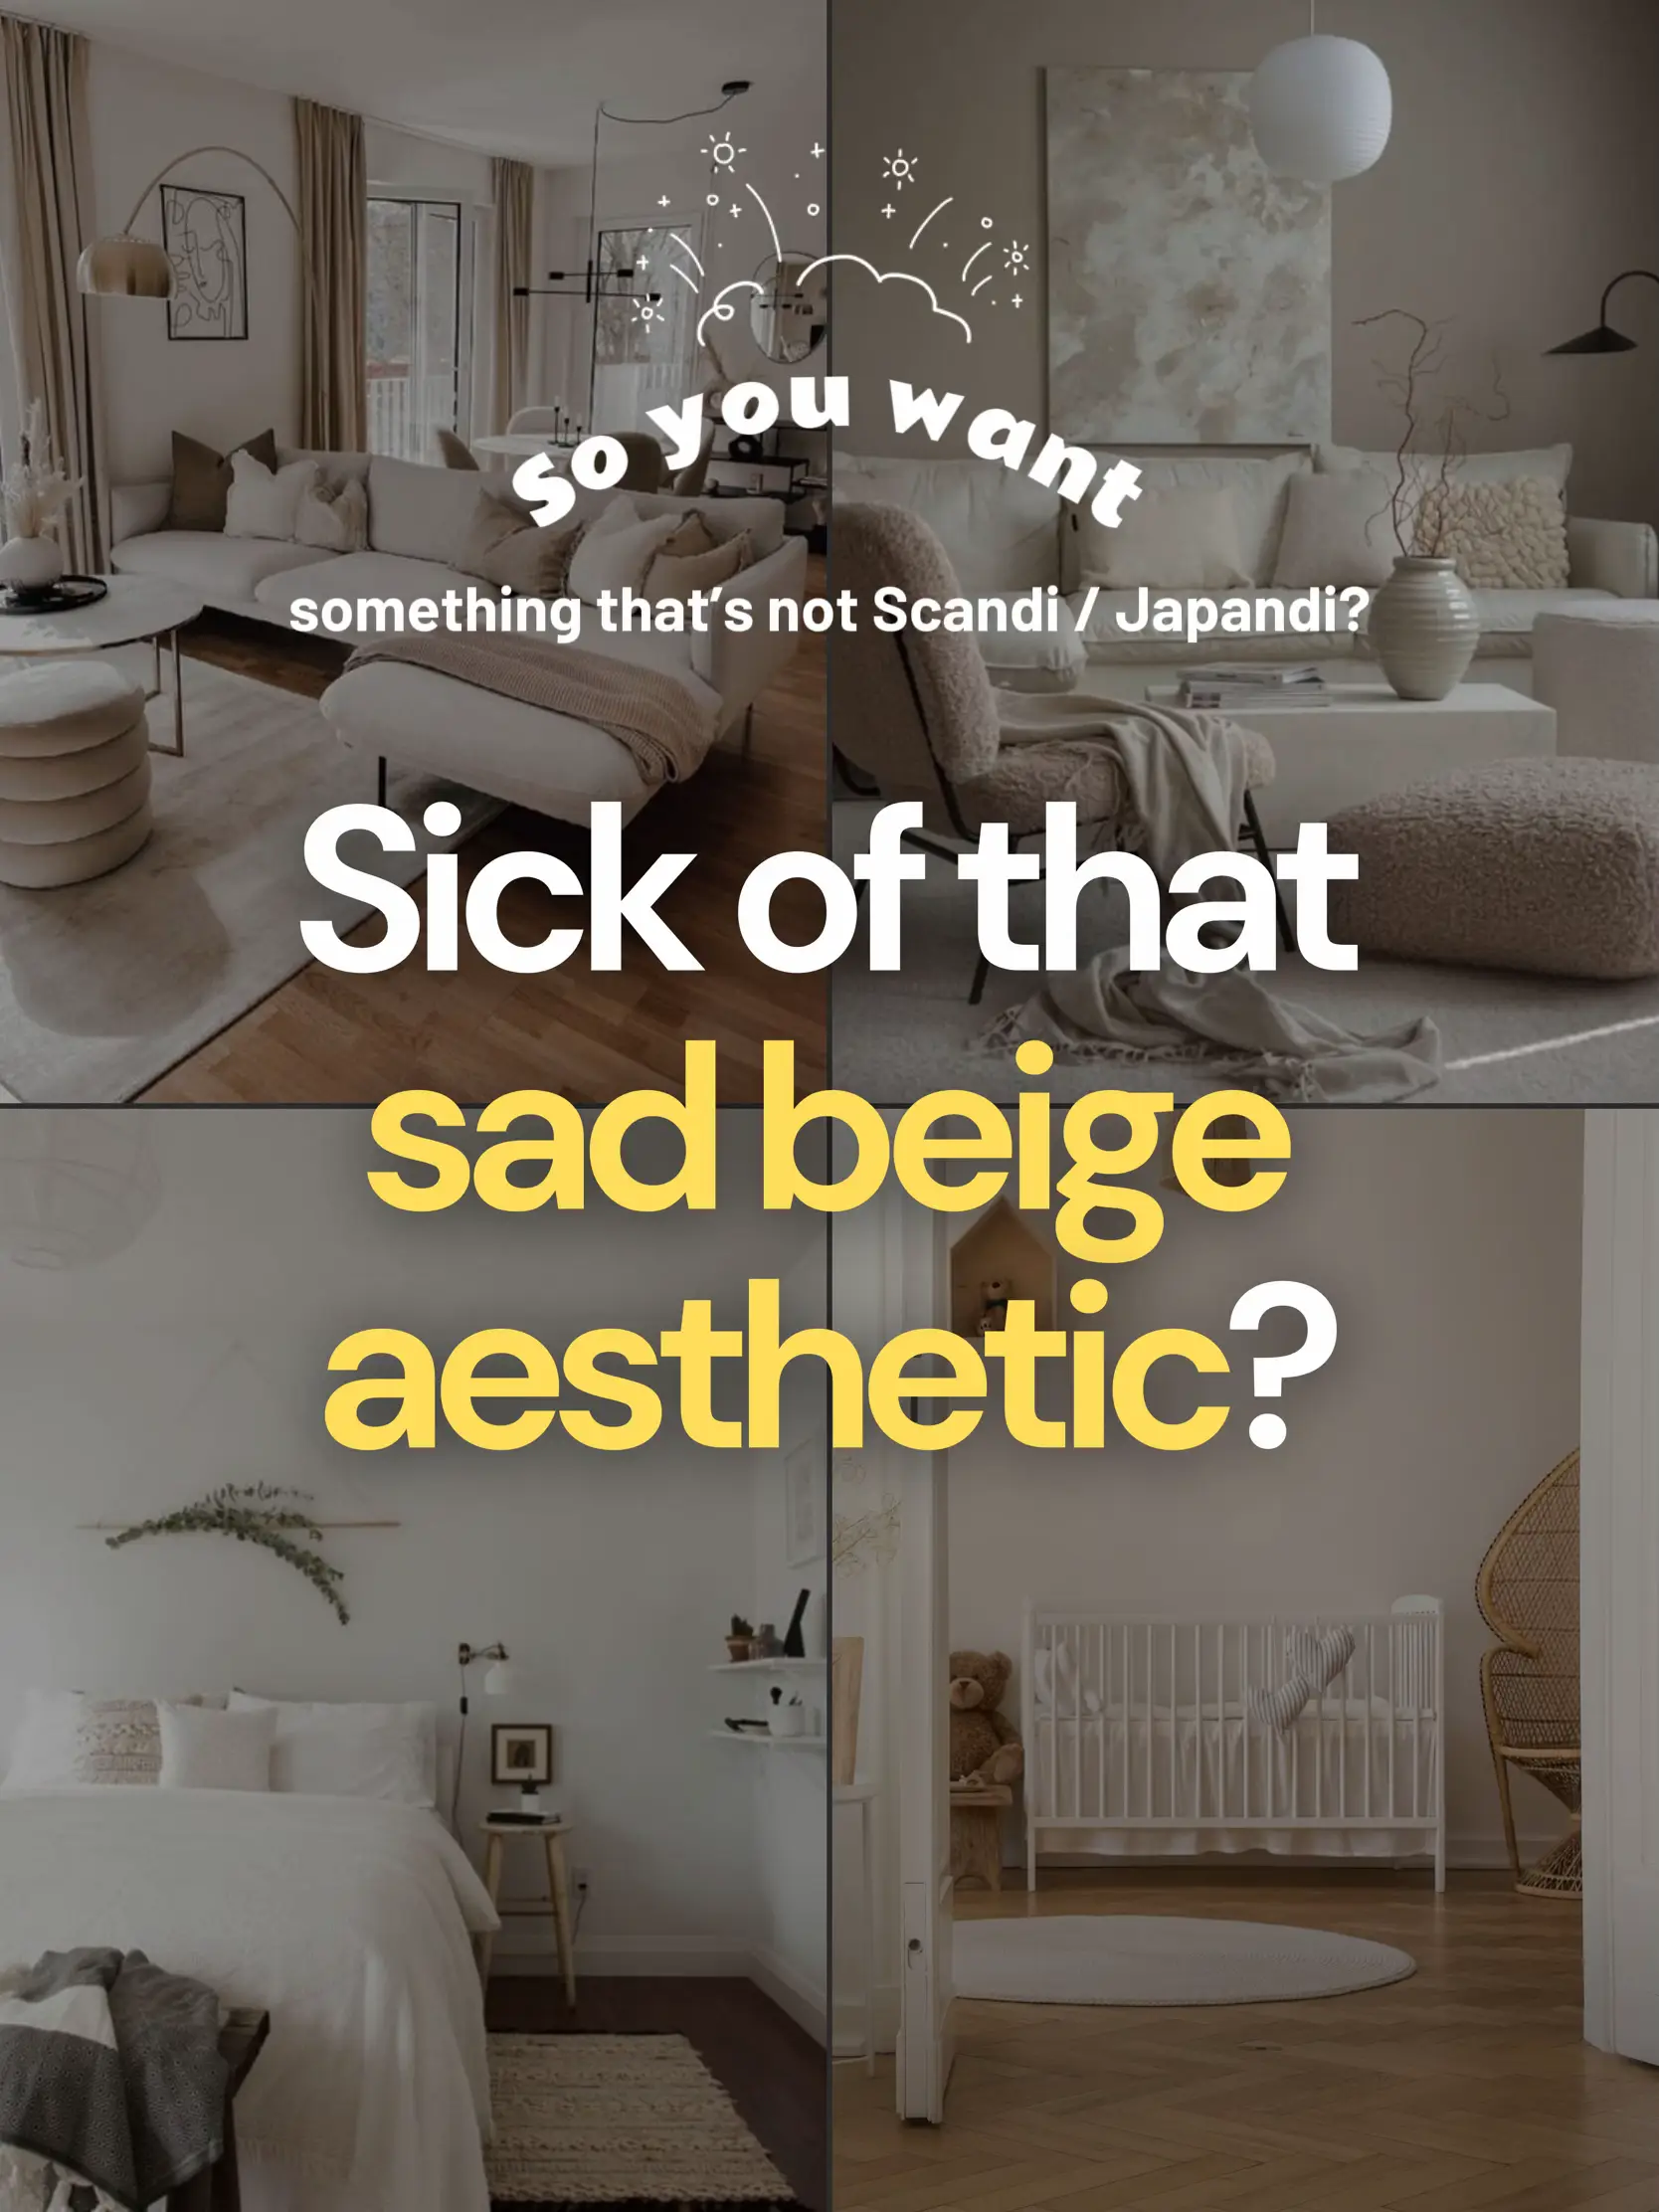 The sad beige aesthetic 🥲, Gallery posted by Lisa